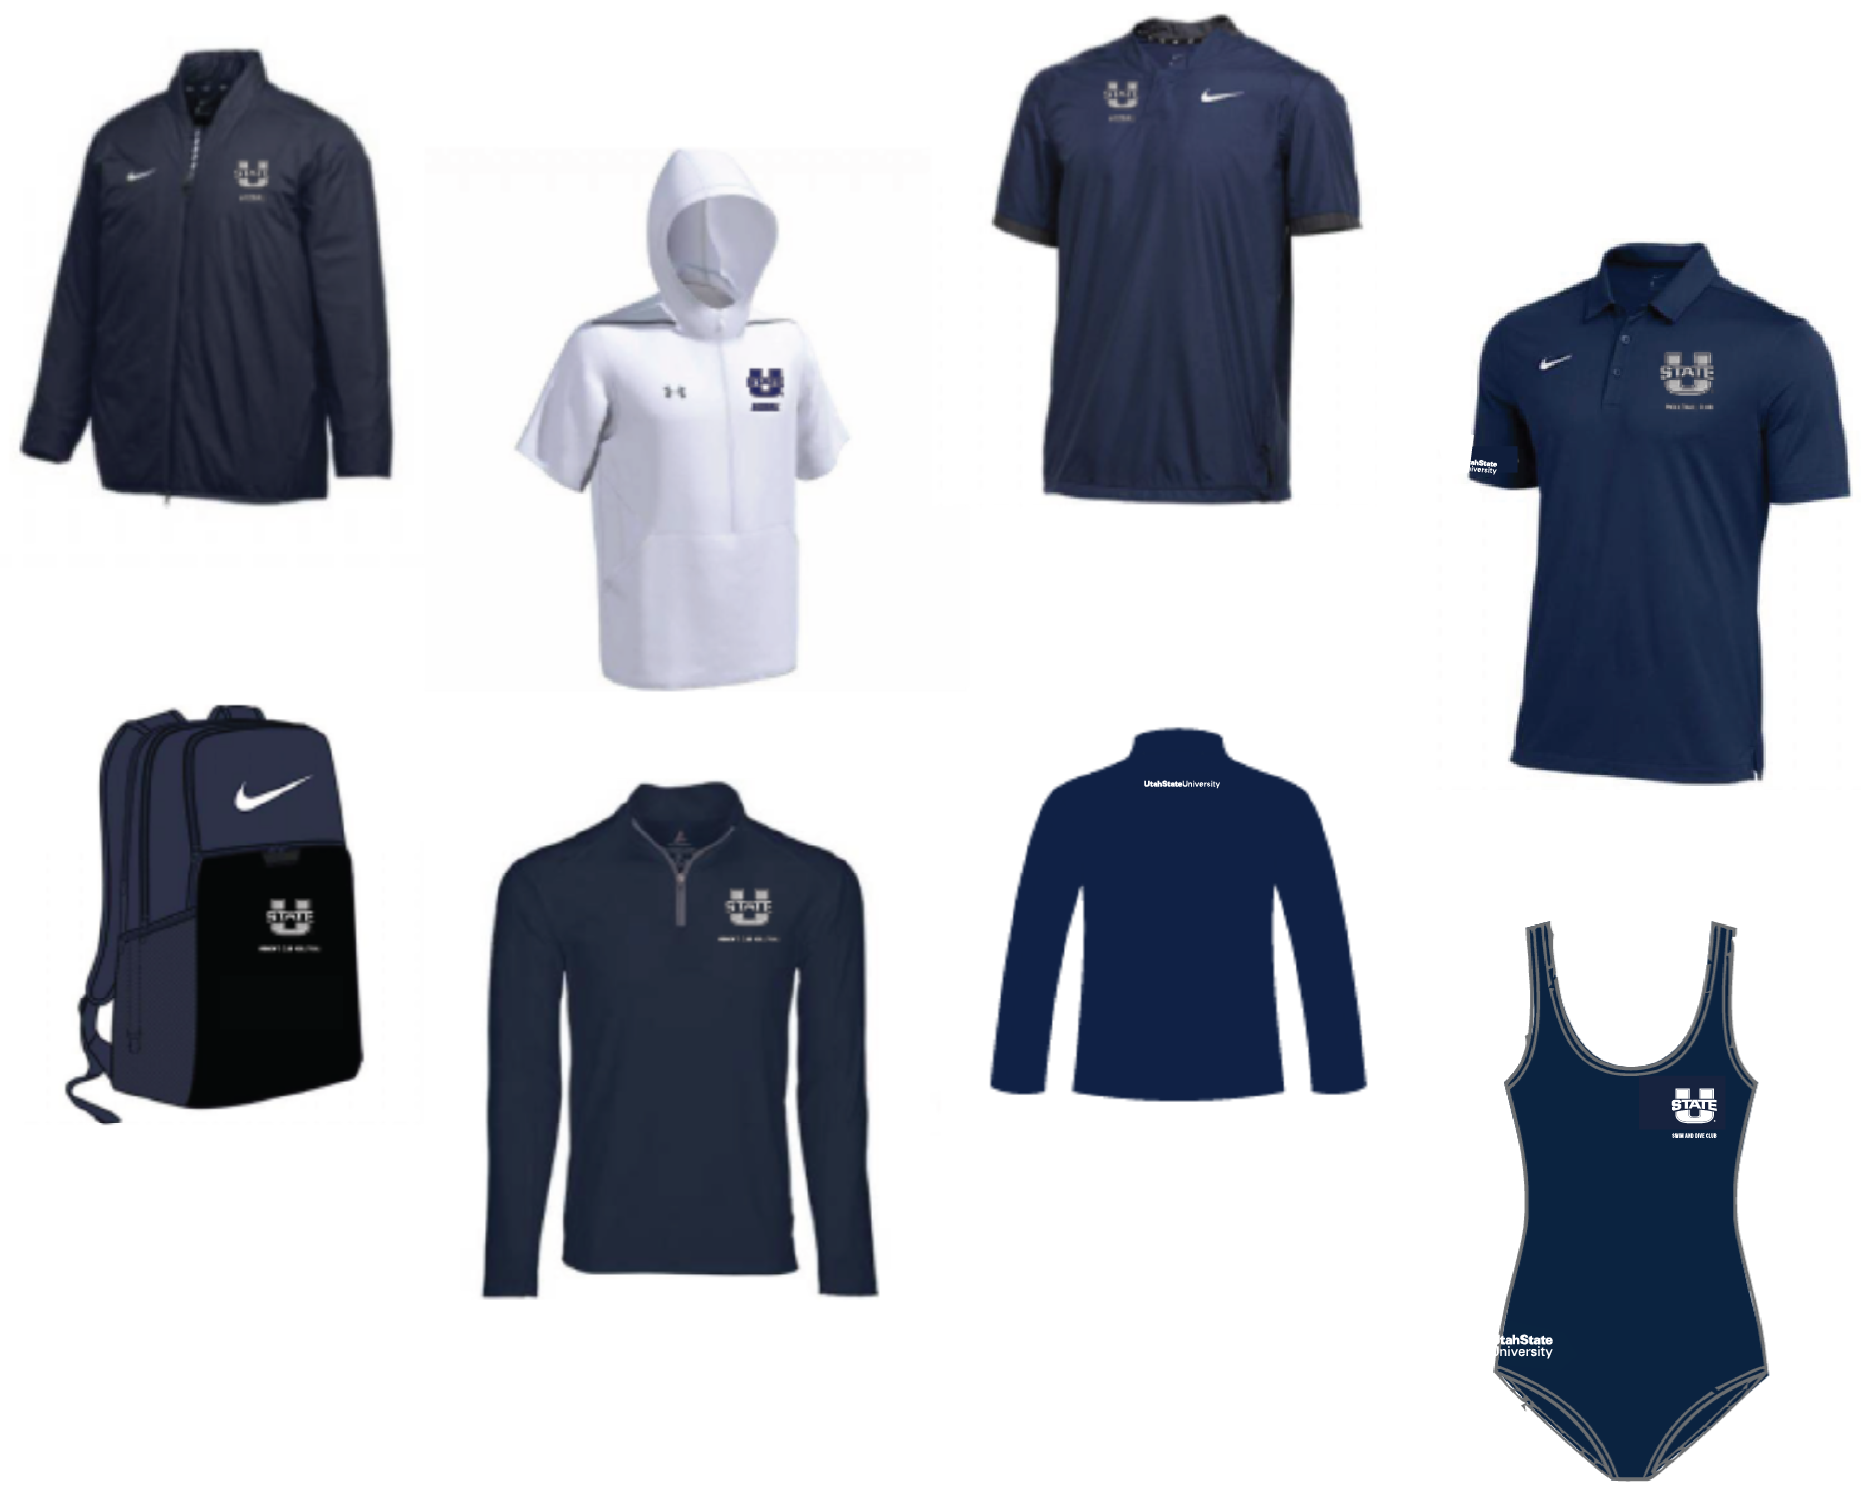 Officially Licensed Team Sports Apparel - Concepts Sport - United States